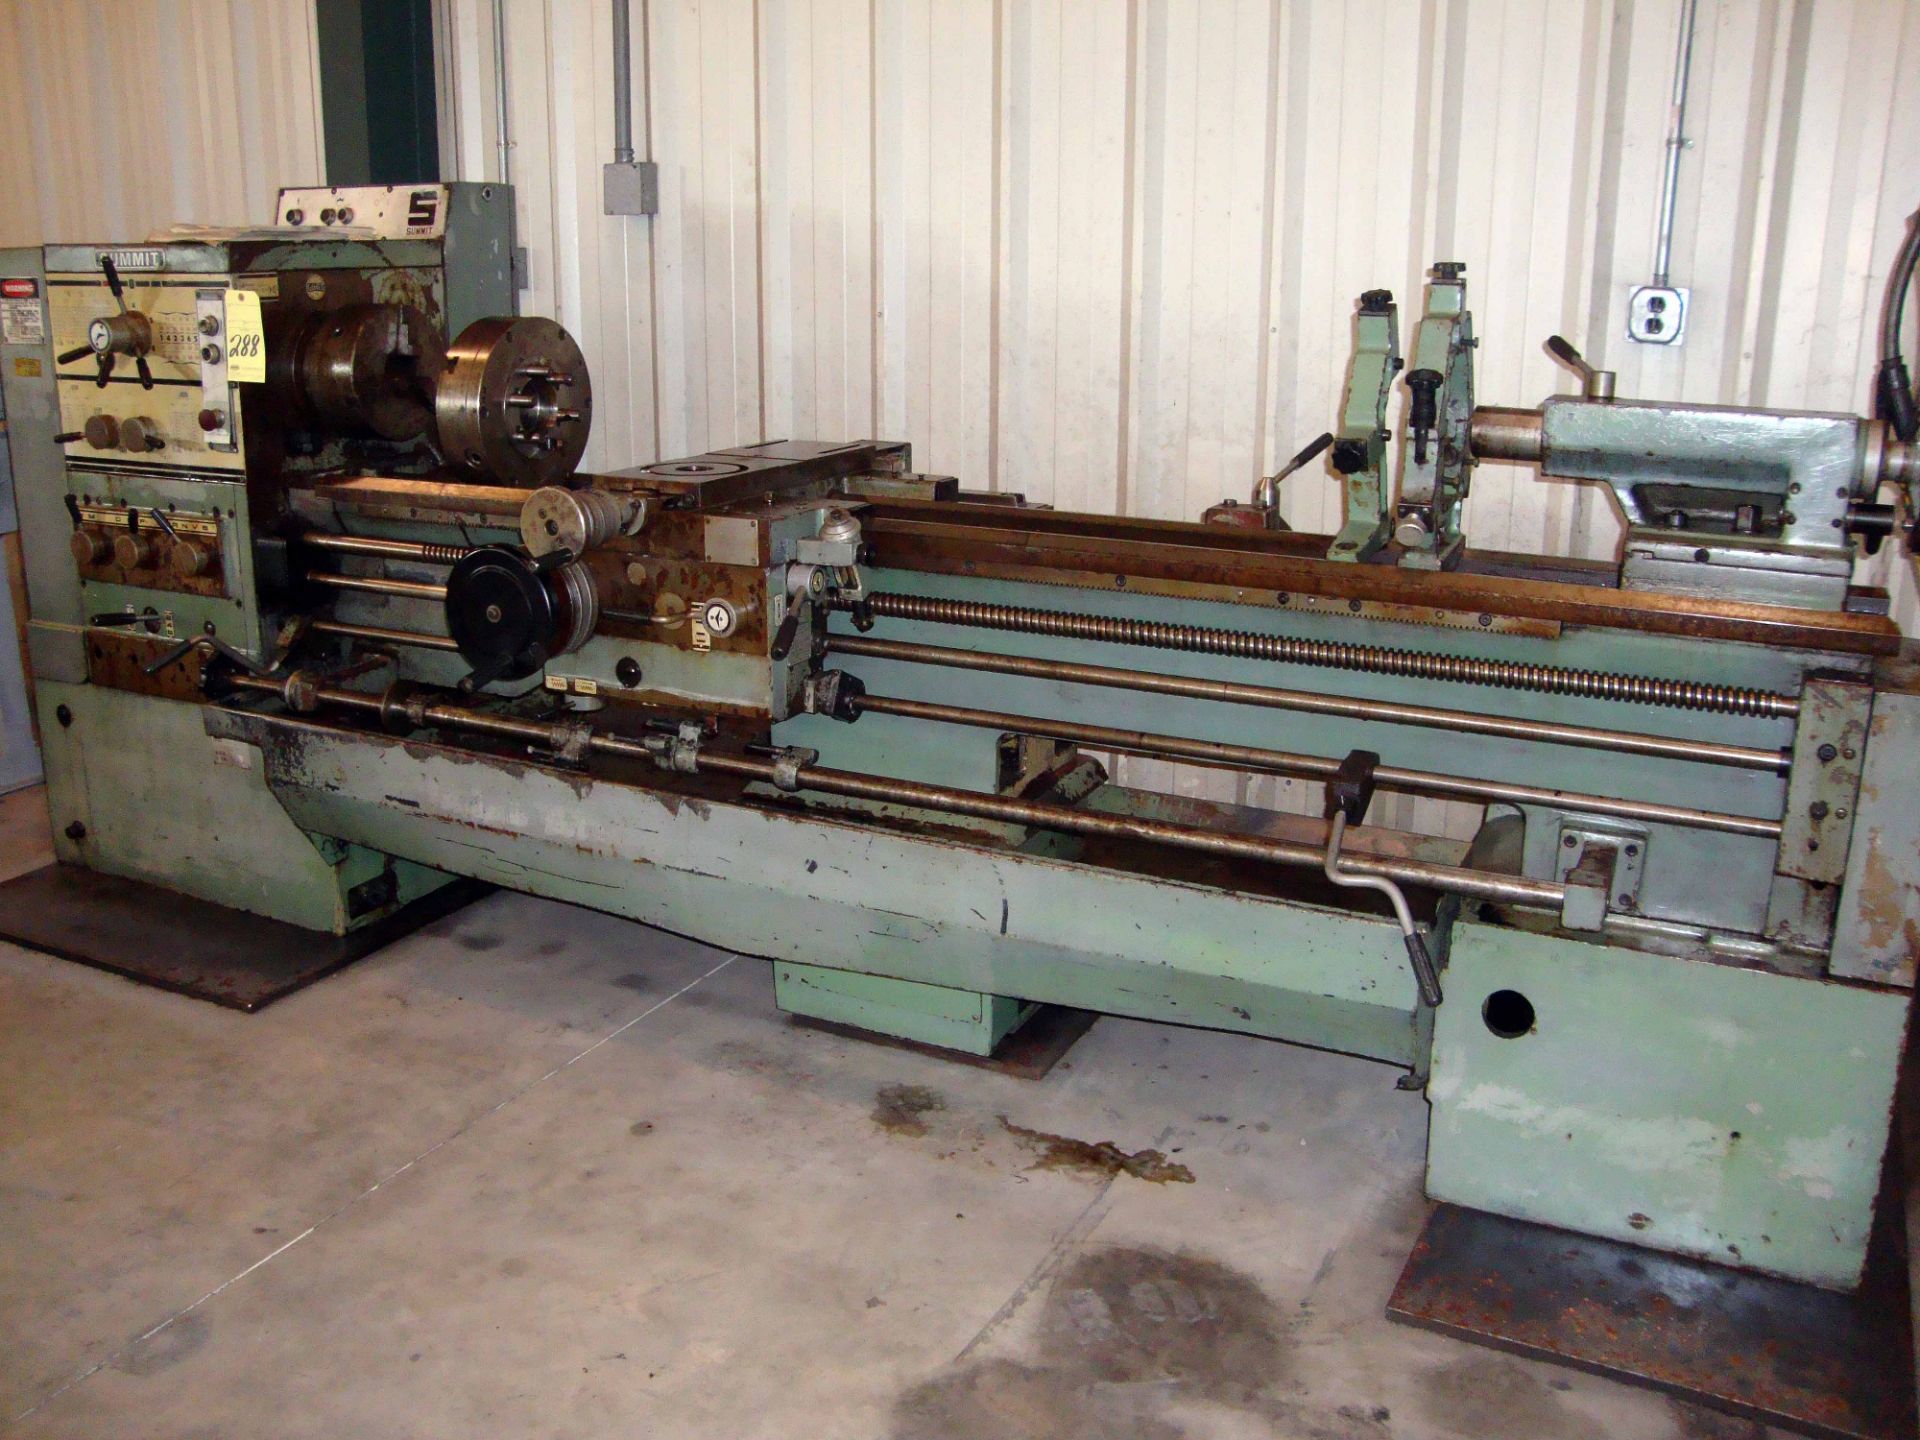 GAP BED ENGINE LATHE, SUMMIT 16" X 80", spds: 25-2000 RPM, 2-1/8" spdl. hole, inch/metric thdng.,